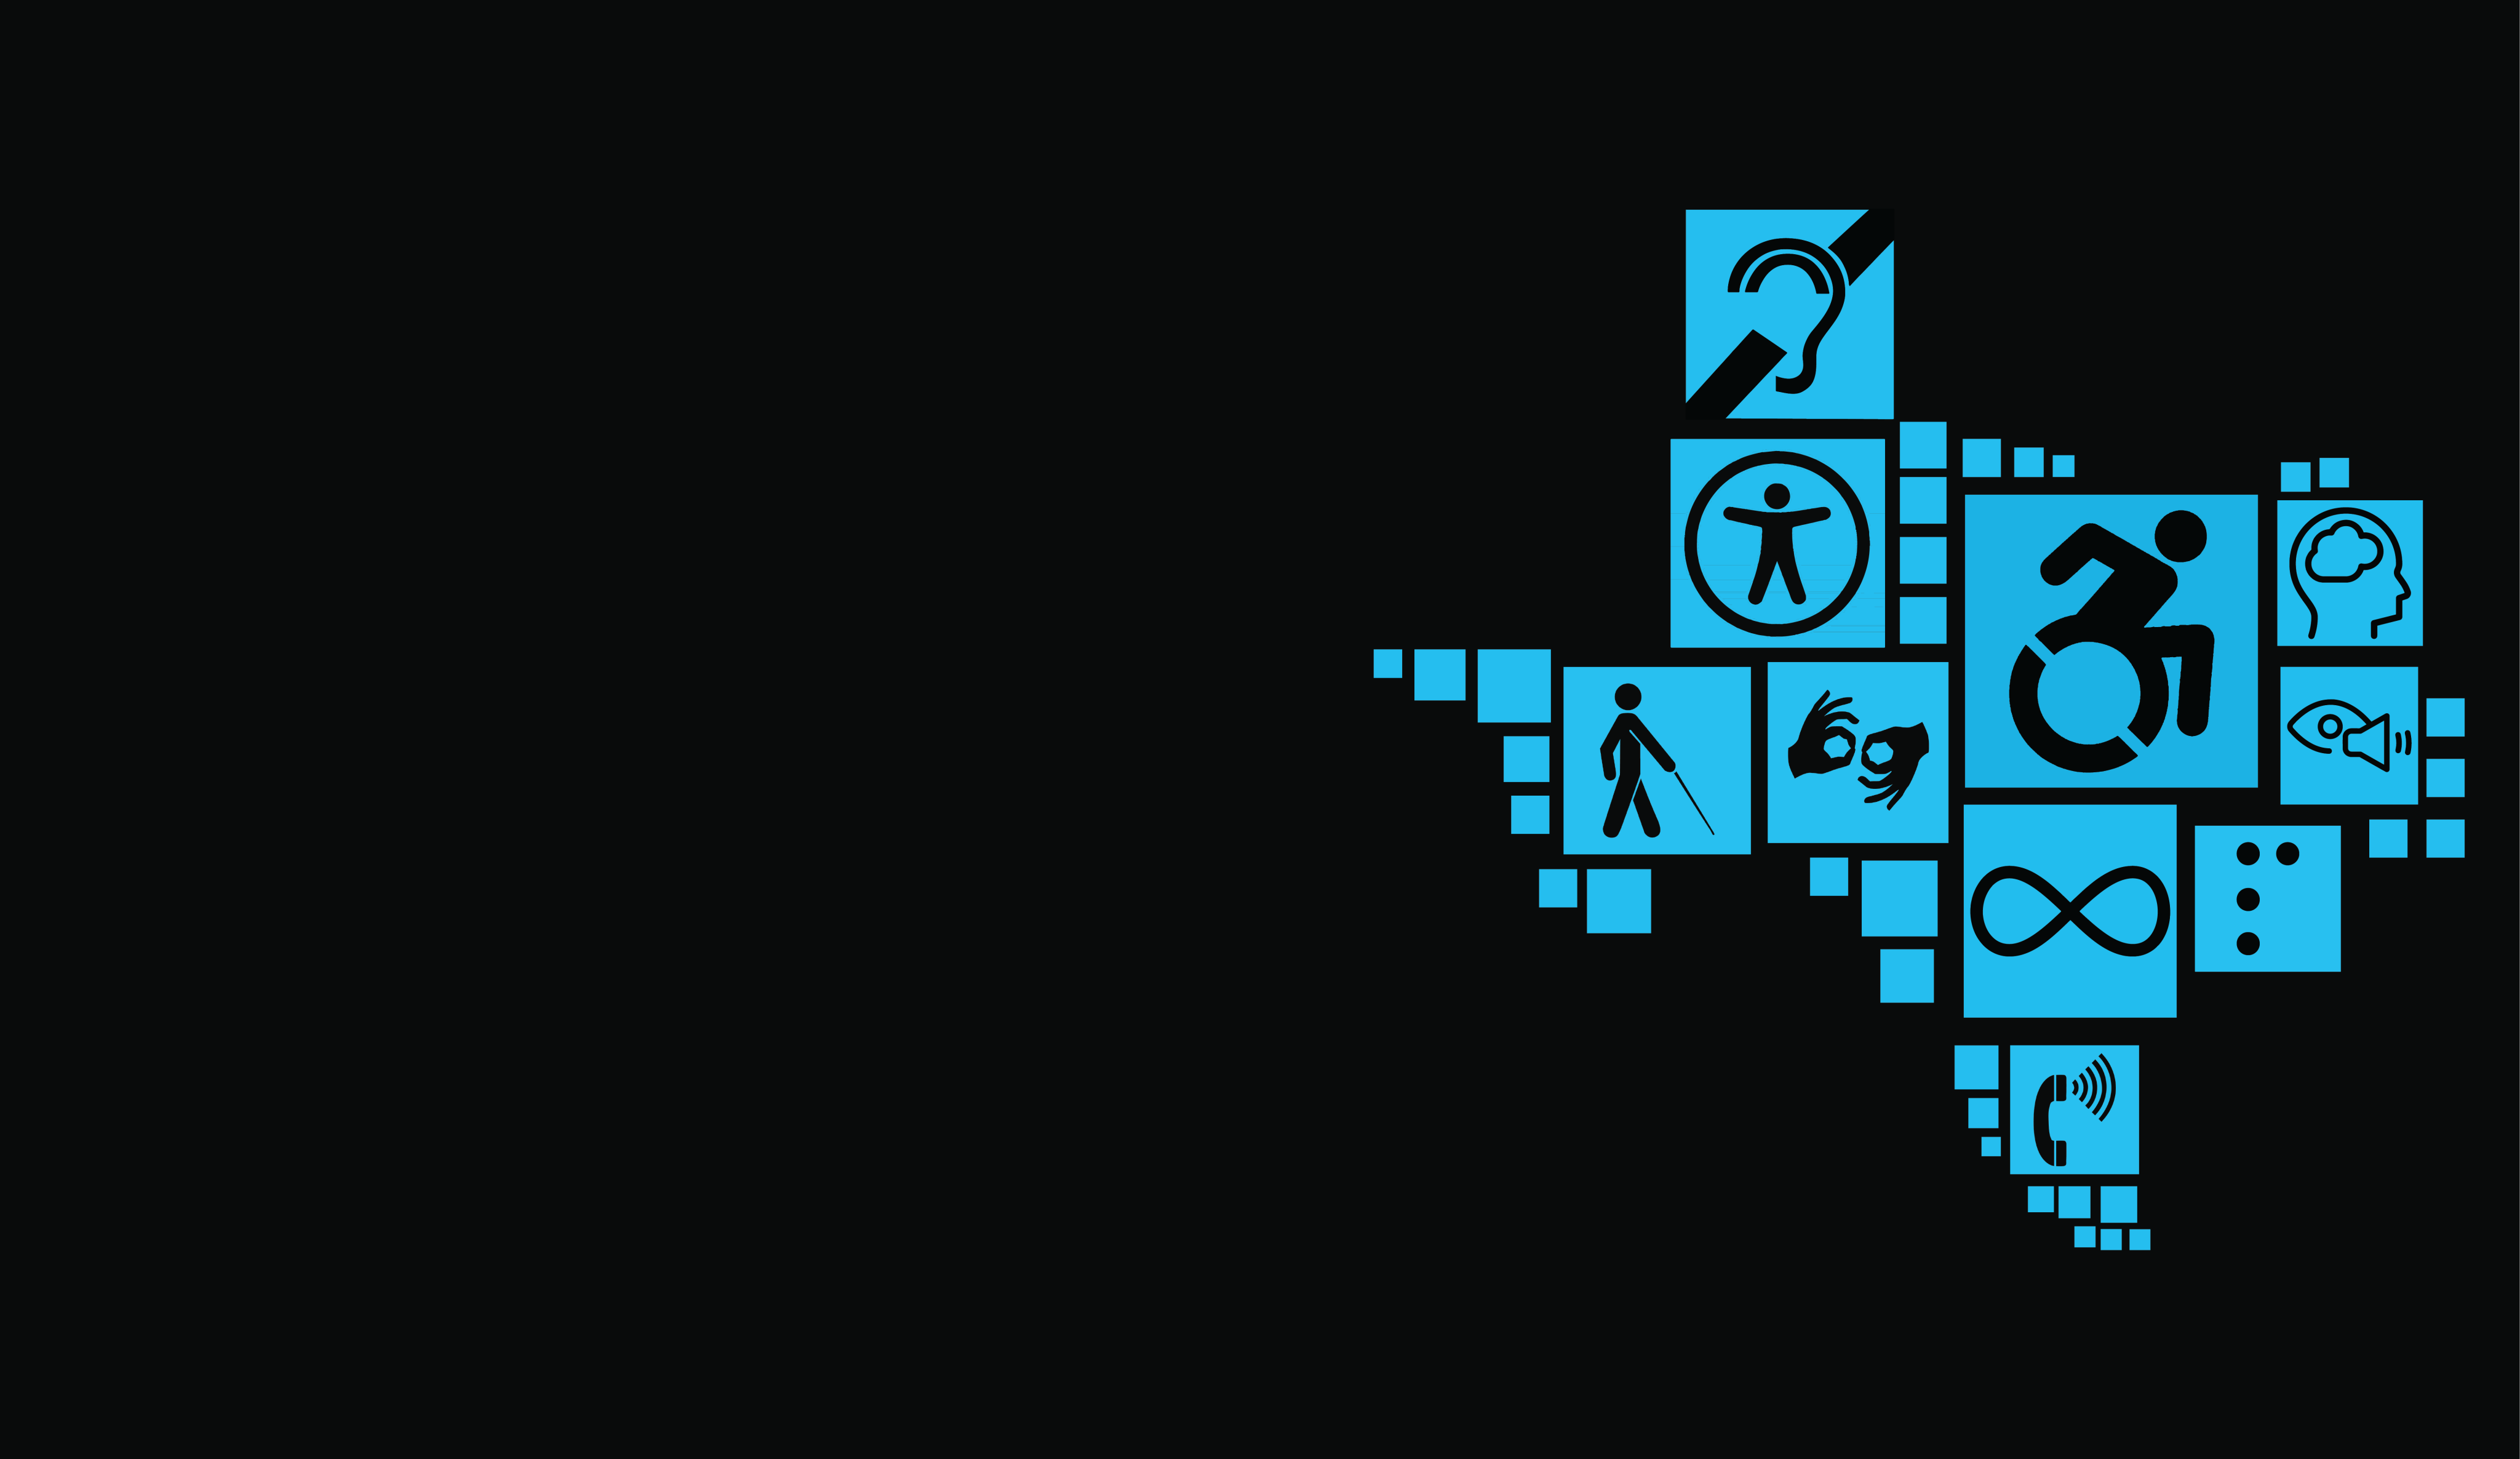 Dozens of squares of various sizes come together to make the shape of the state of Texas. In several of the boxes are disability access symbols including symbols for low vision access, sign language interpretation, hearing loss access, braille, wheelchair accessibility, volume control telephone, intellectual disability, autism, and universal access.